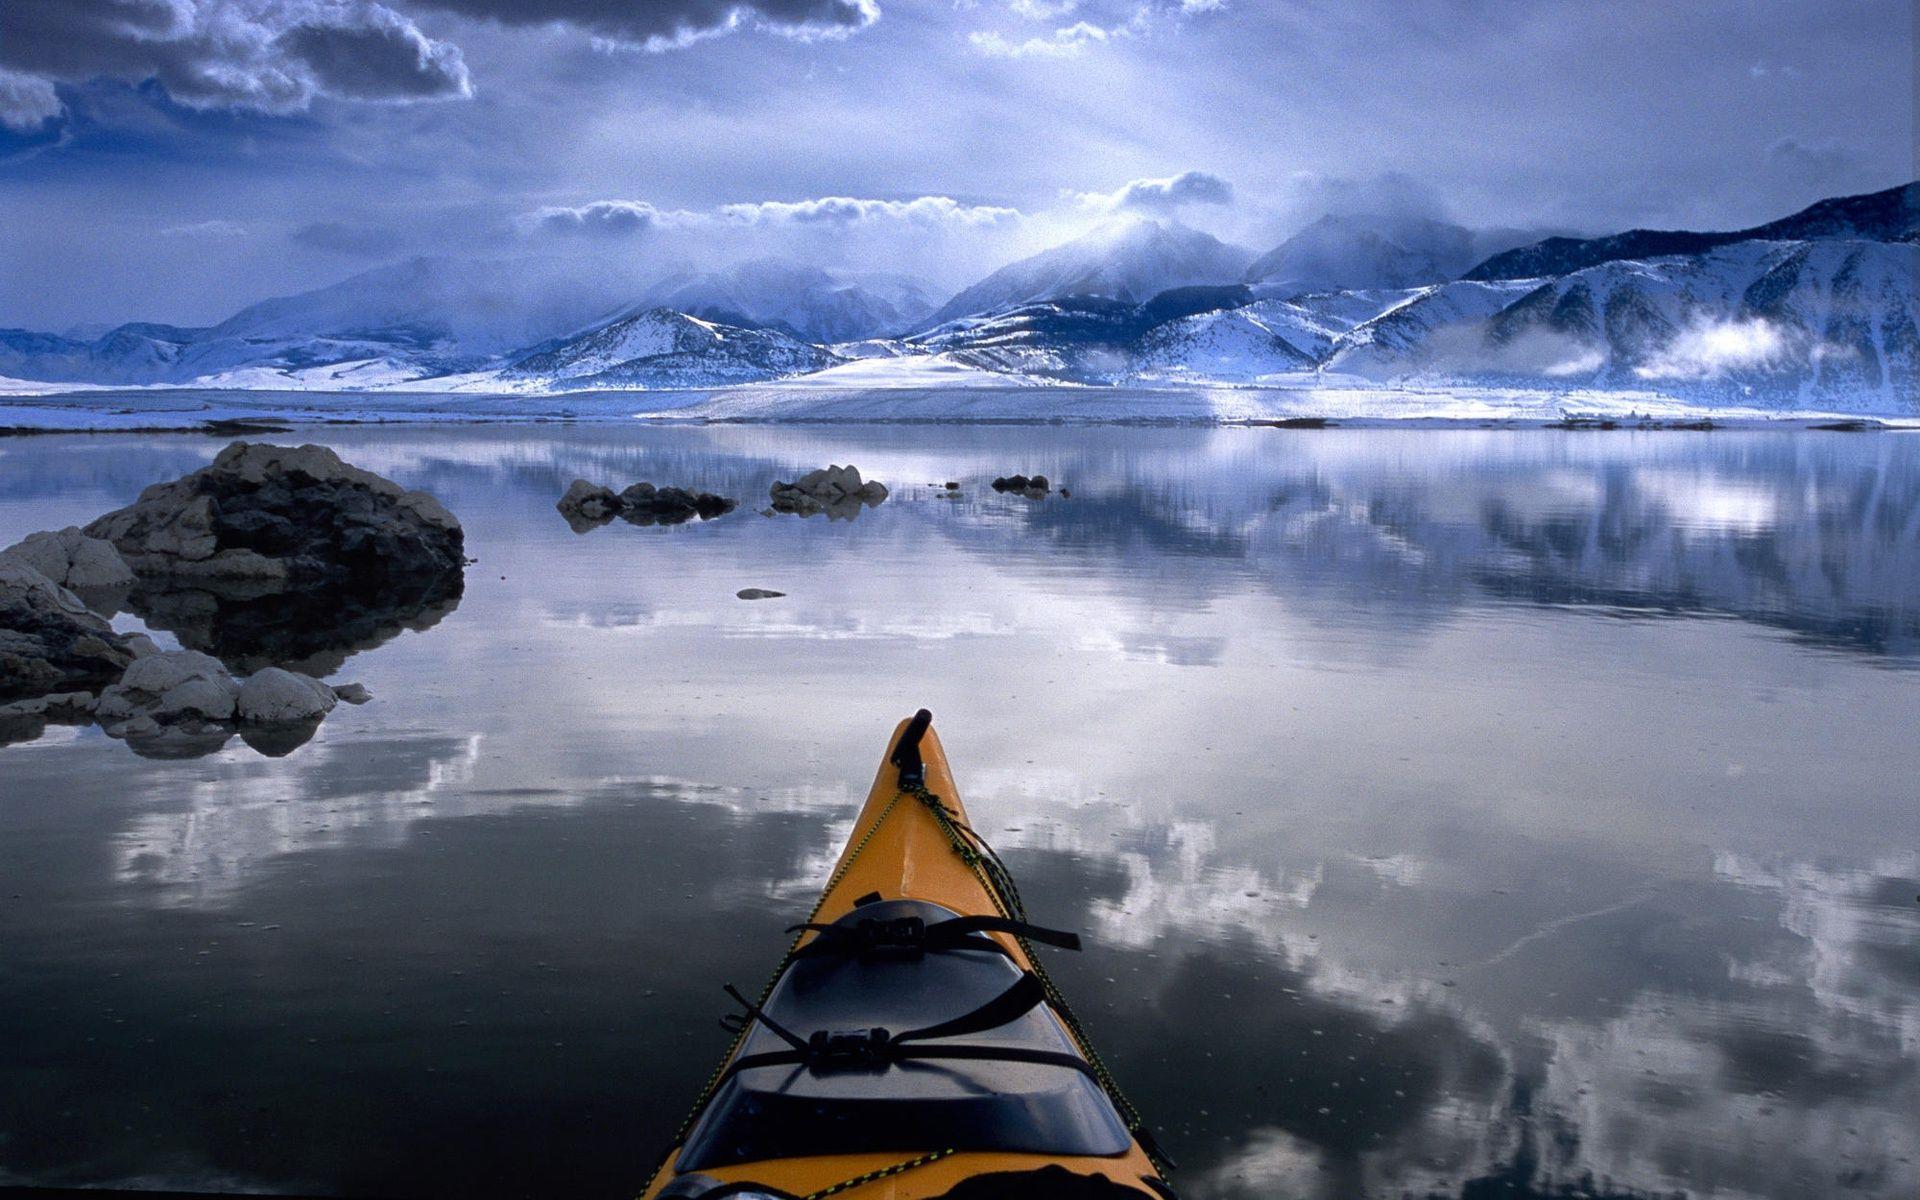 Canoe in Cold Alaska Wallpaper and Photo (High Resolution Download)